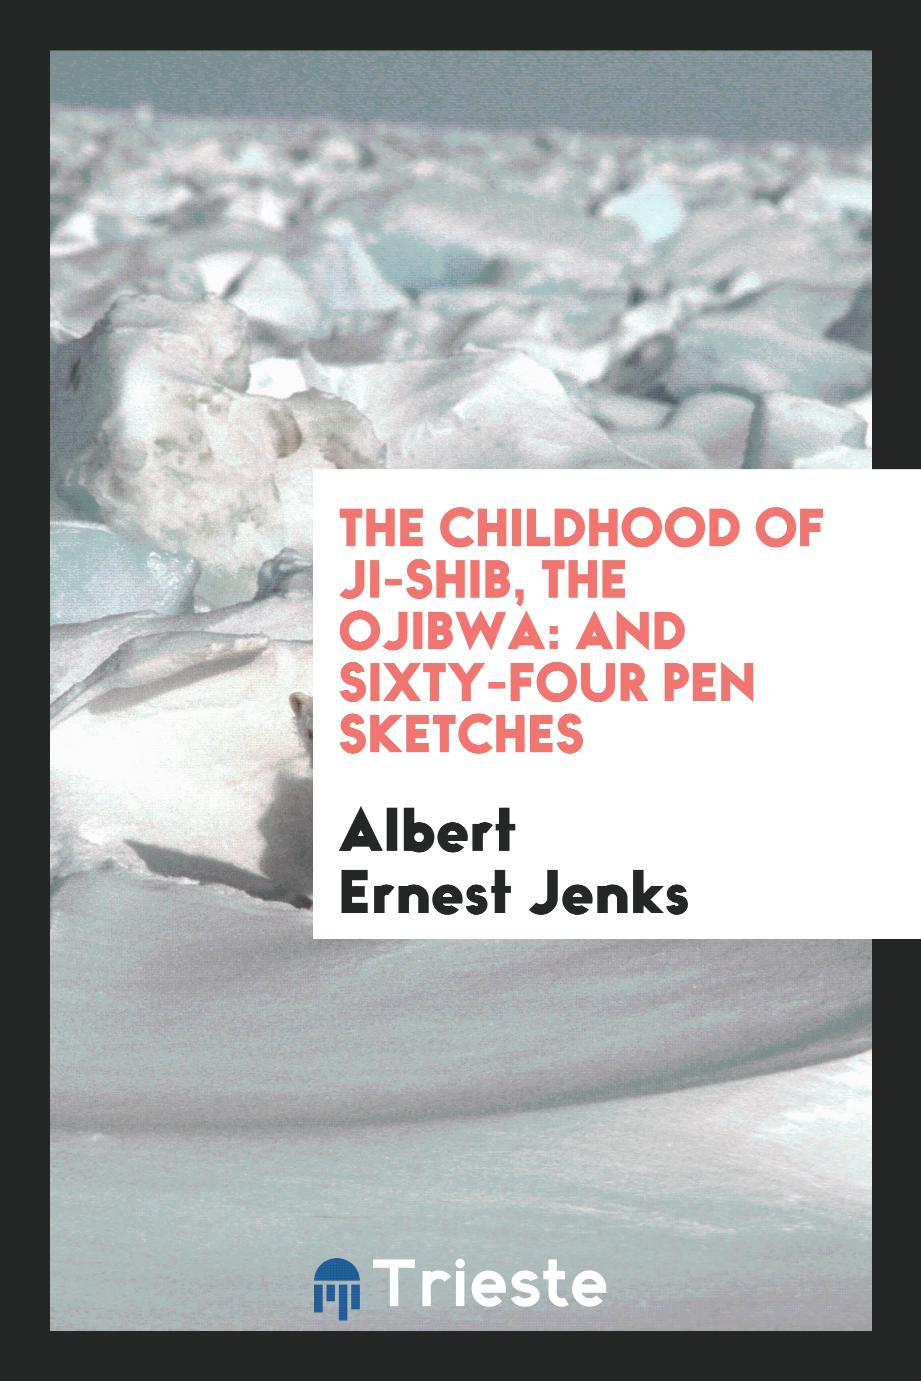 The Childhood of Ji-Shib, the Ojibwa: And Sixty-Four Pen Sketches